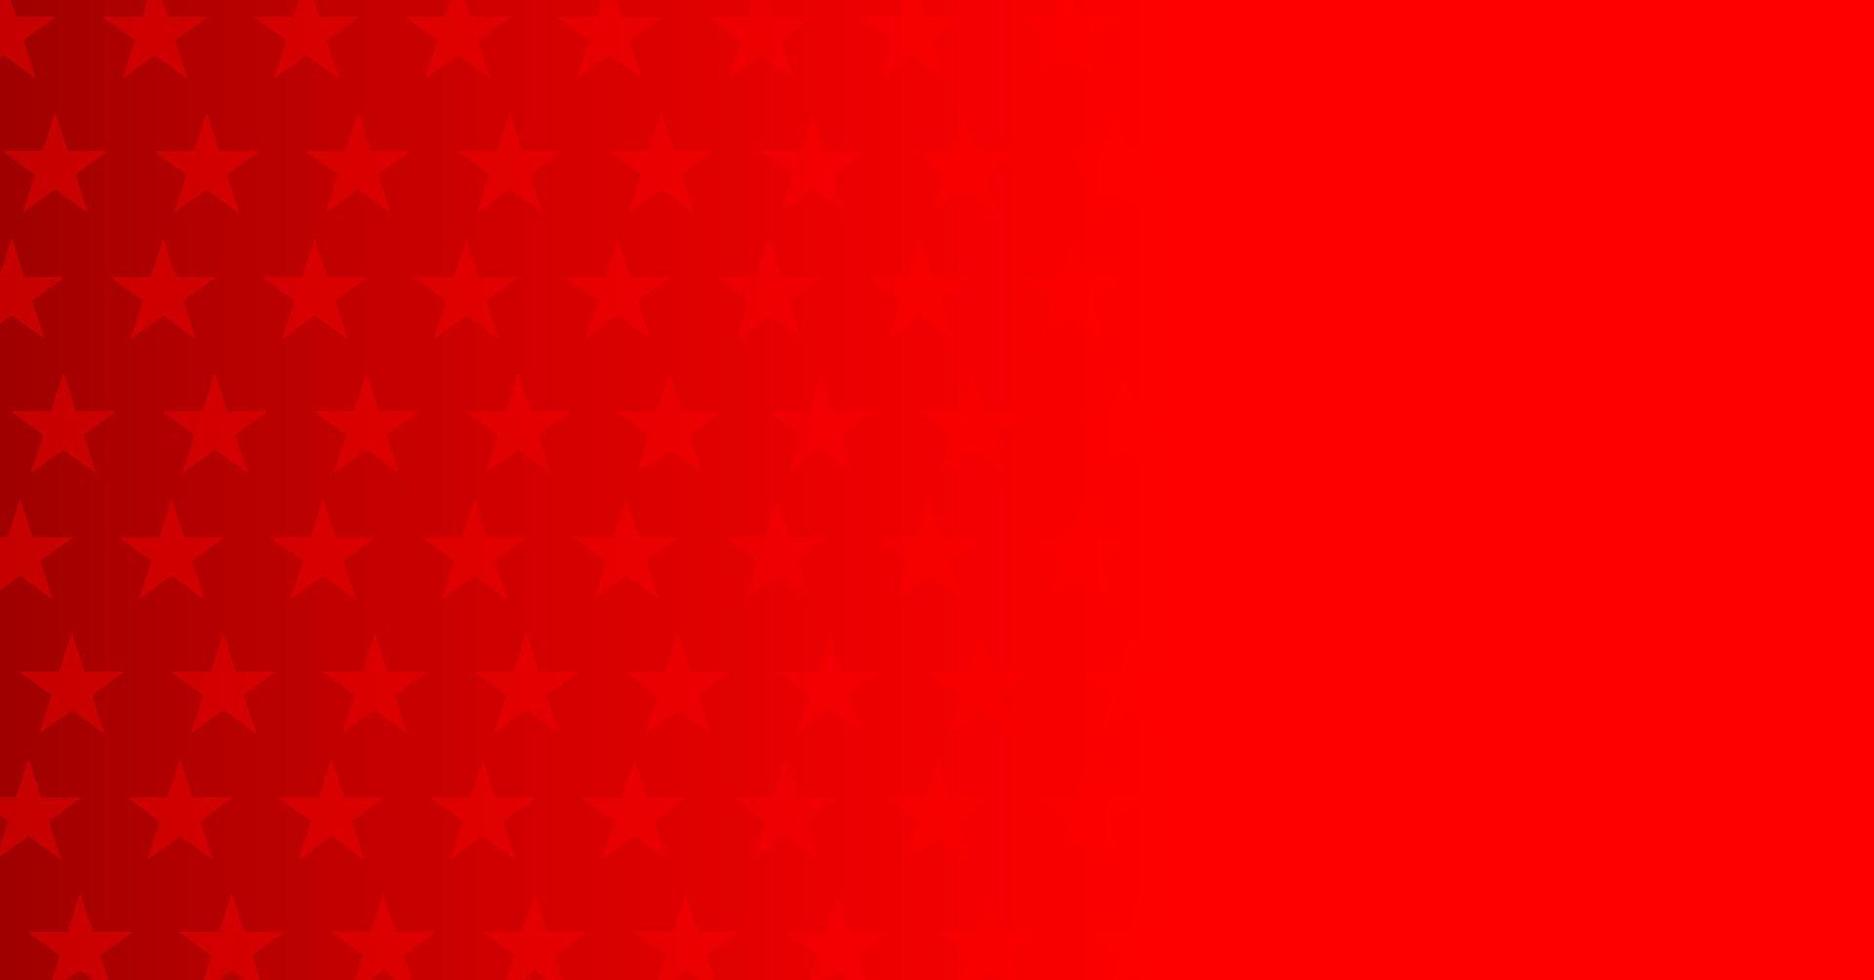 red abstract background new trendy design vector